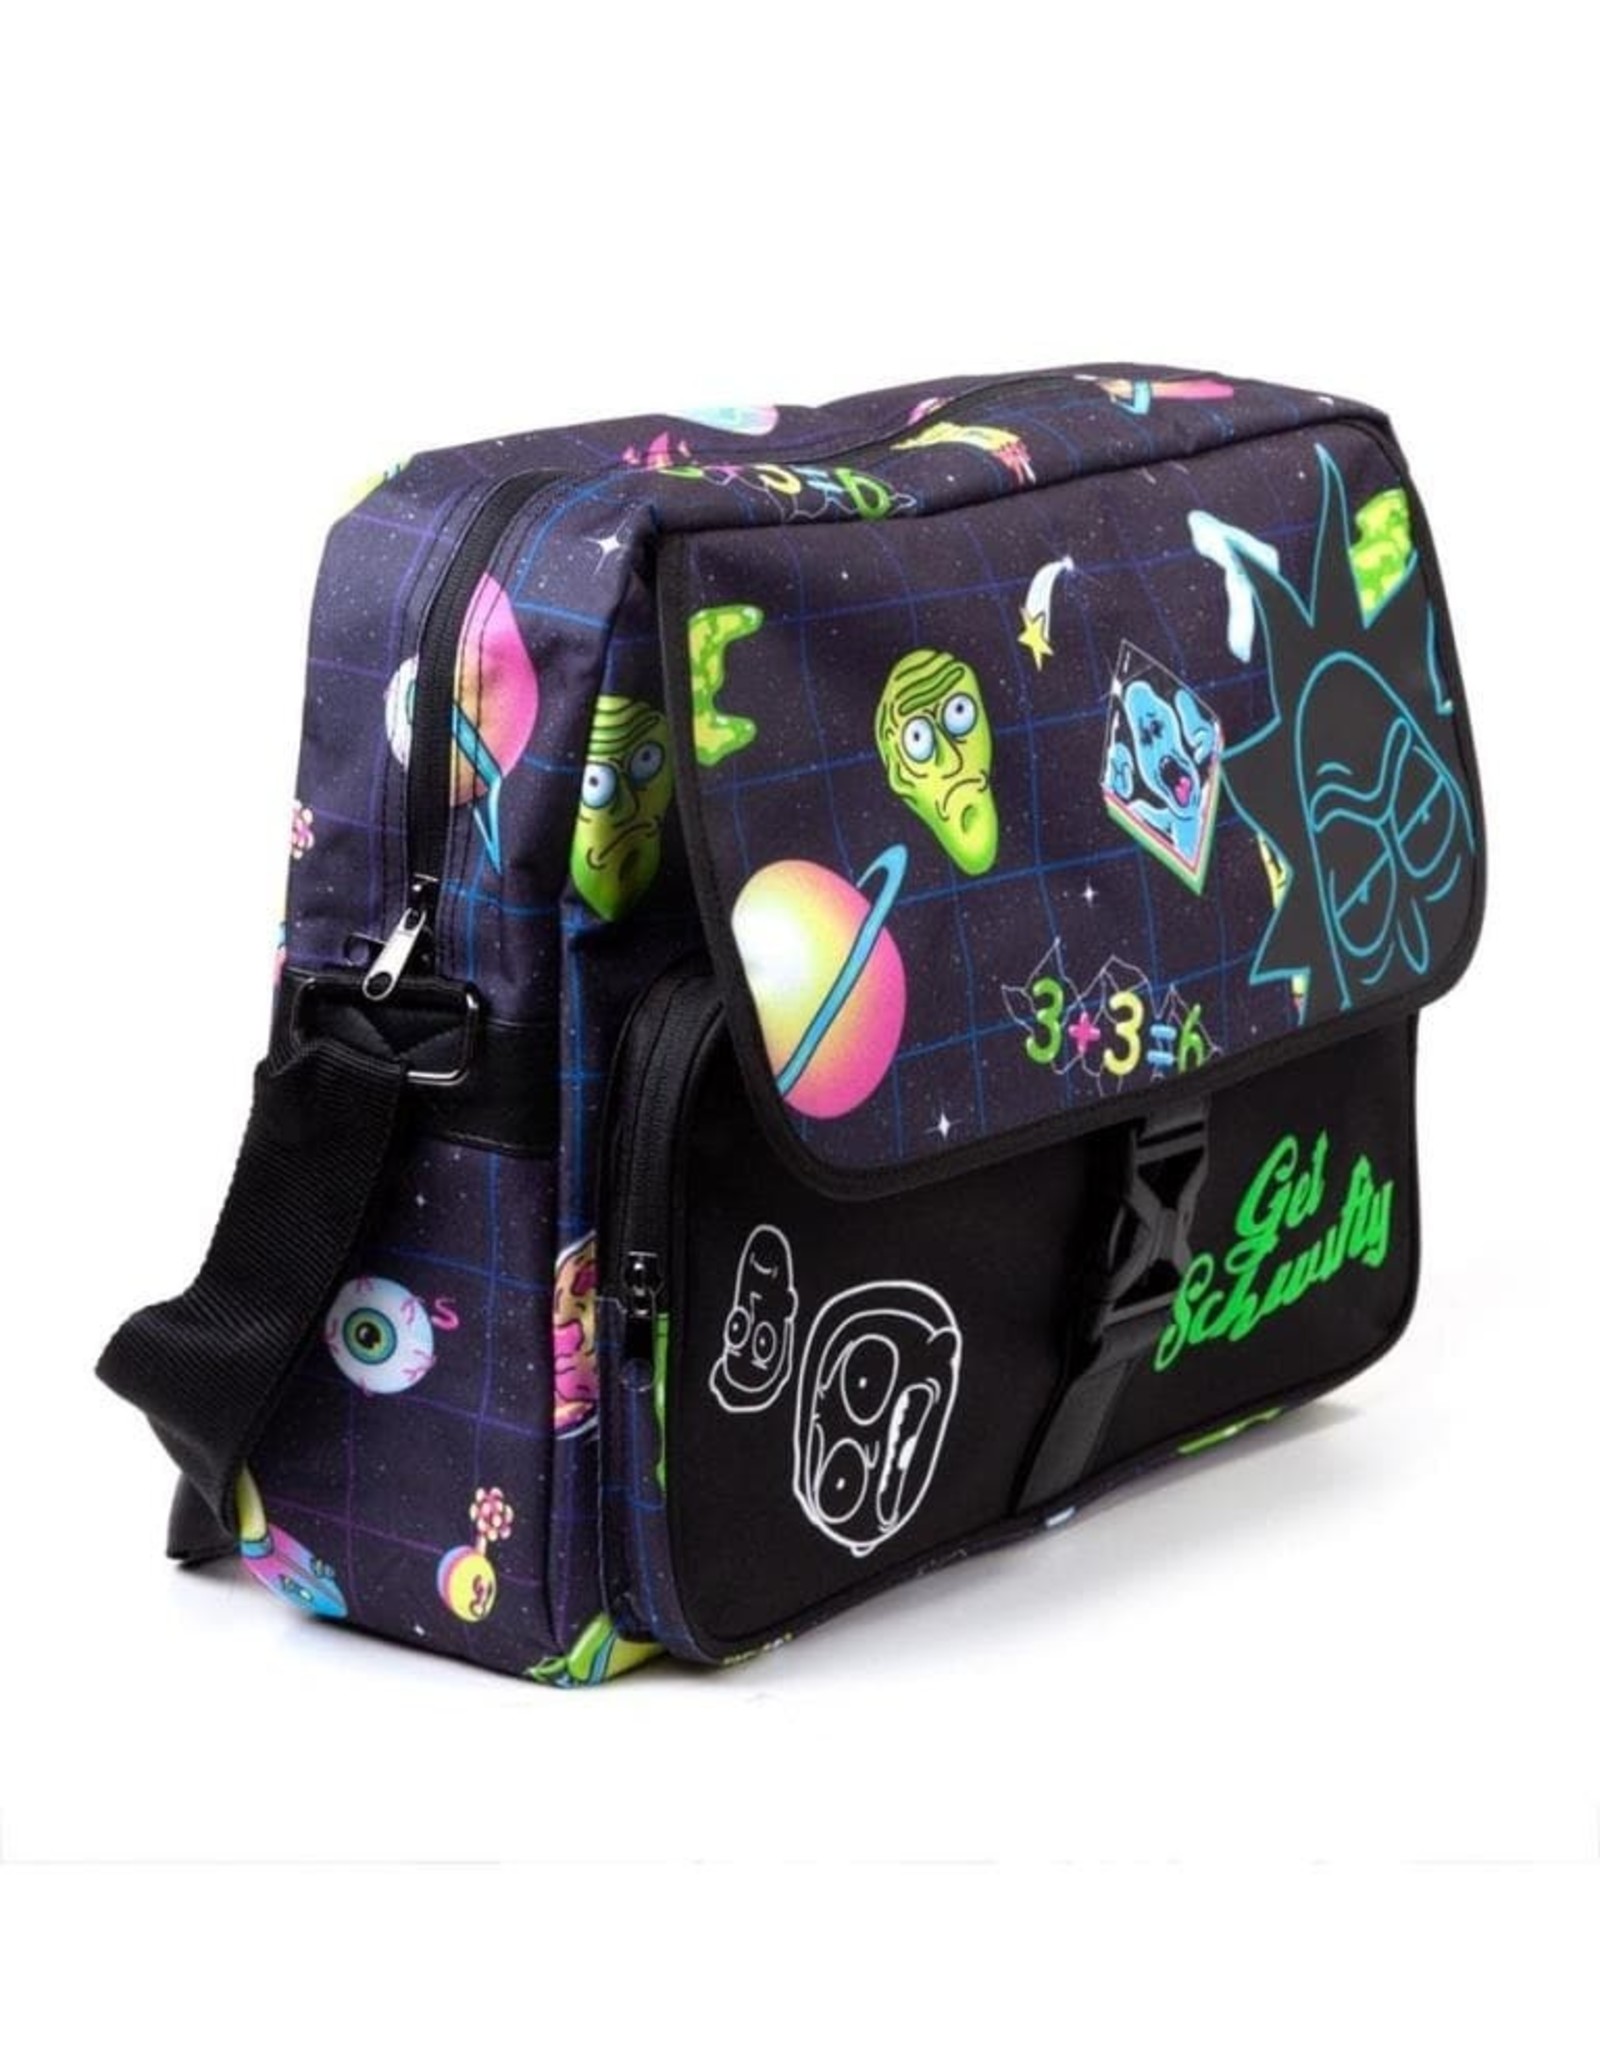 Rick and Morty Merchandise bags - Rick and Morty Space messenger bag